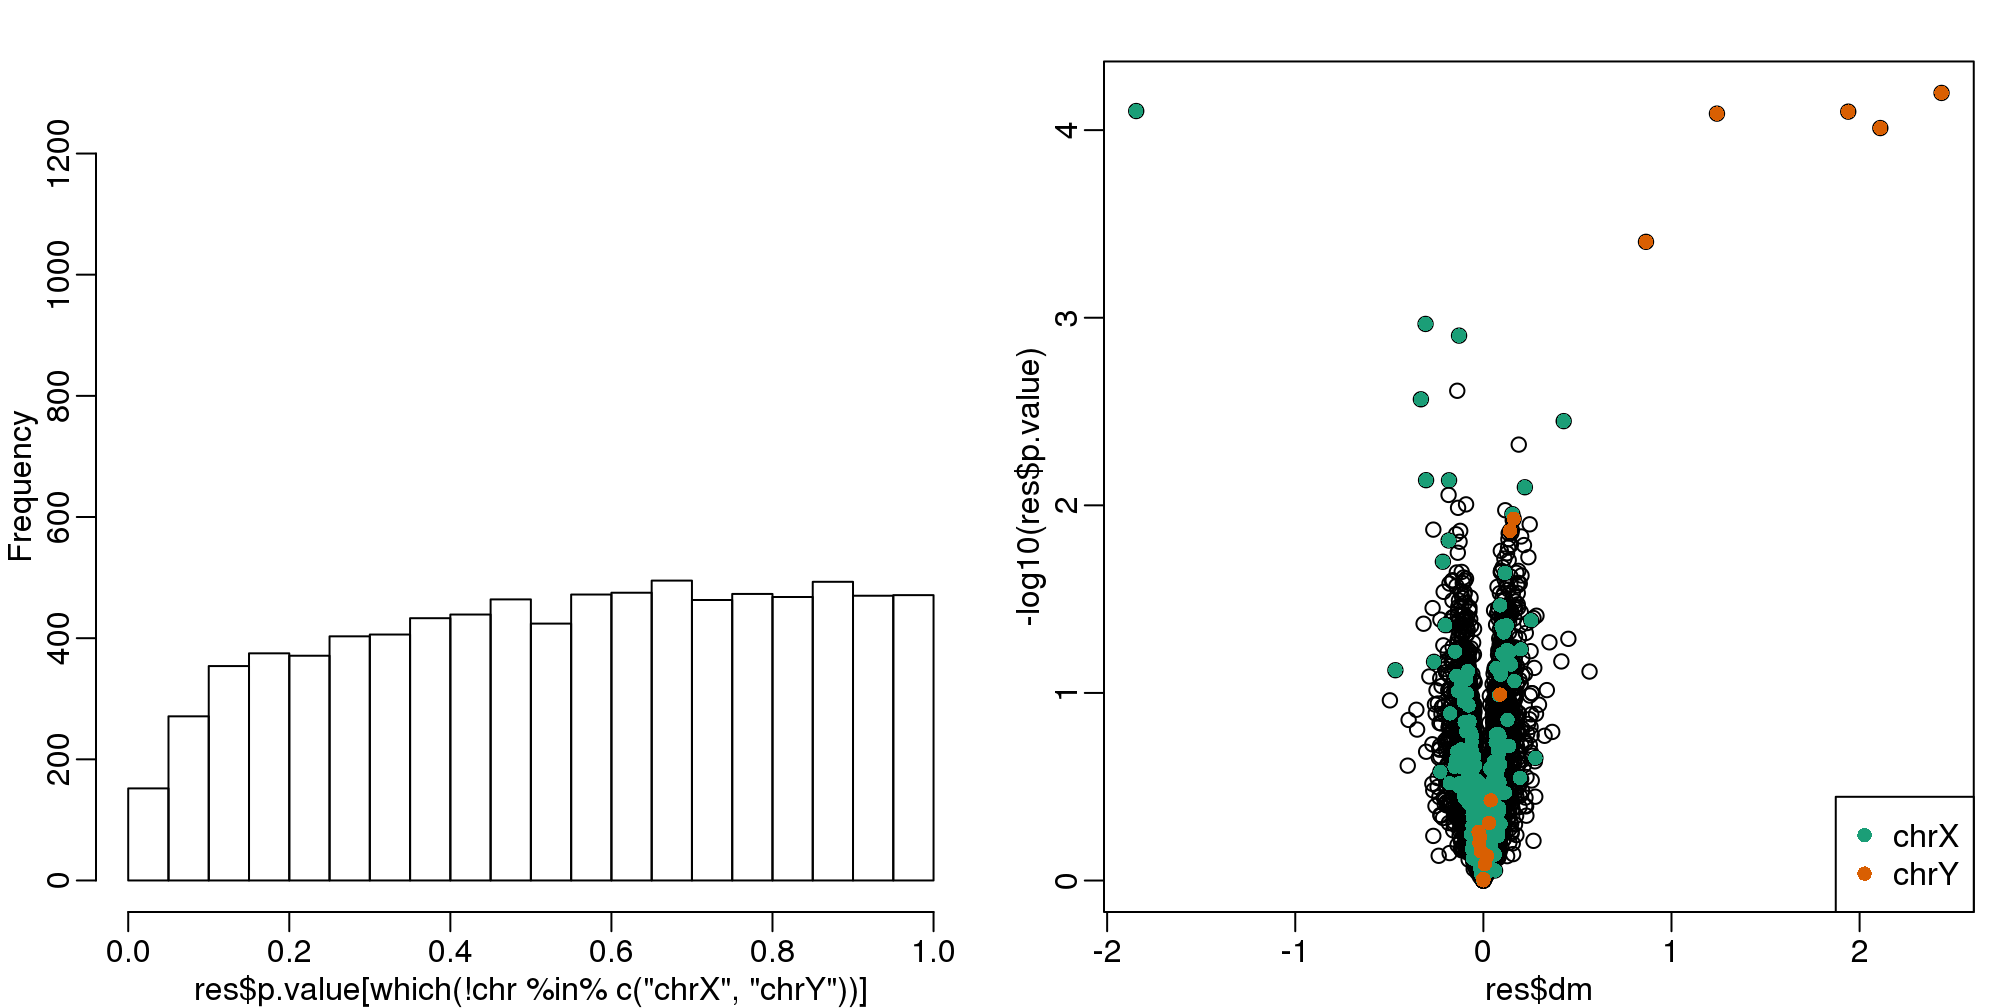 p-value histogram and volcano plot after blindly removing the first two PCs.